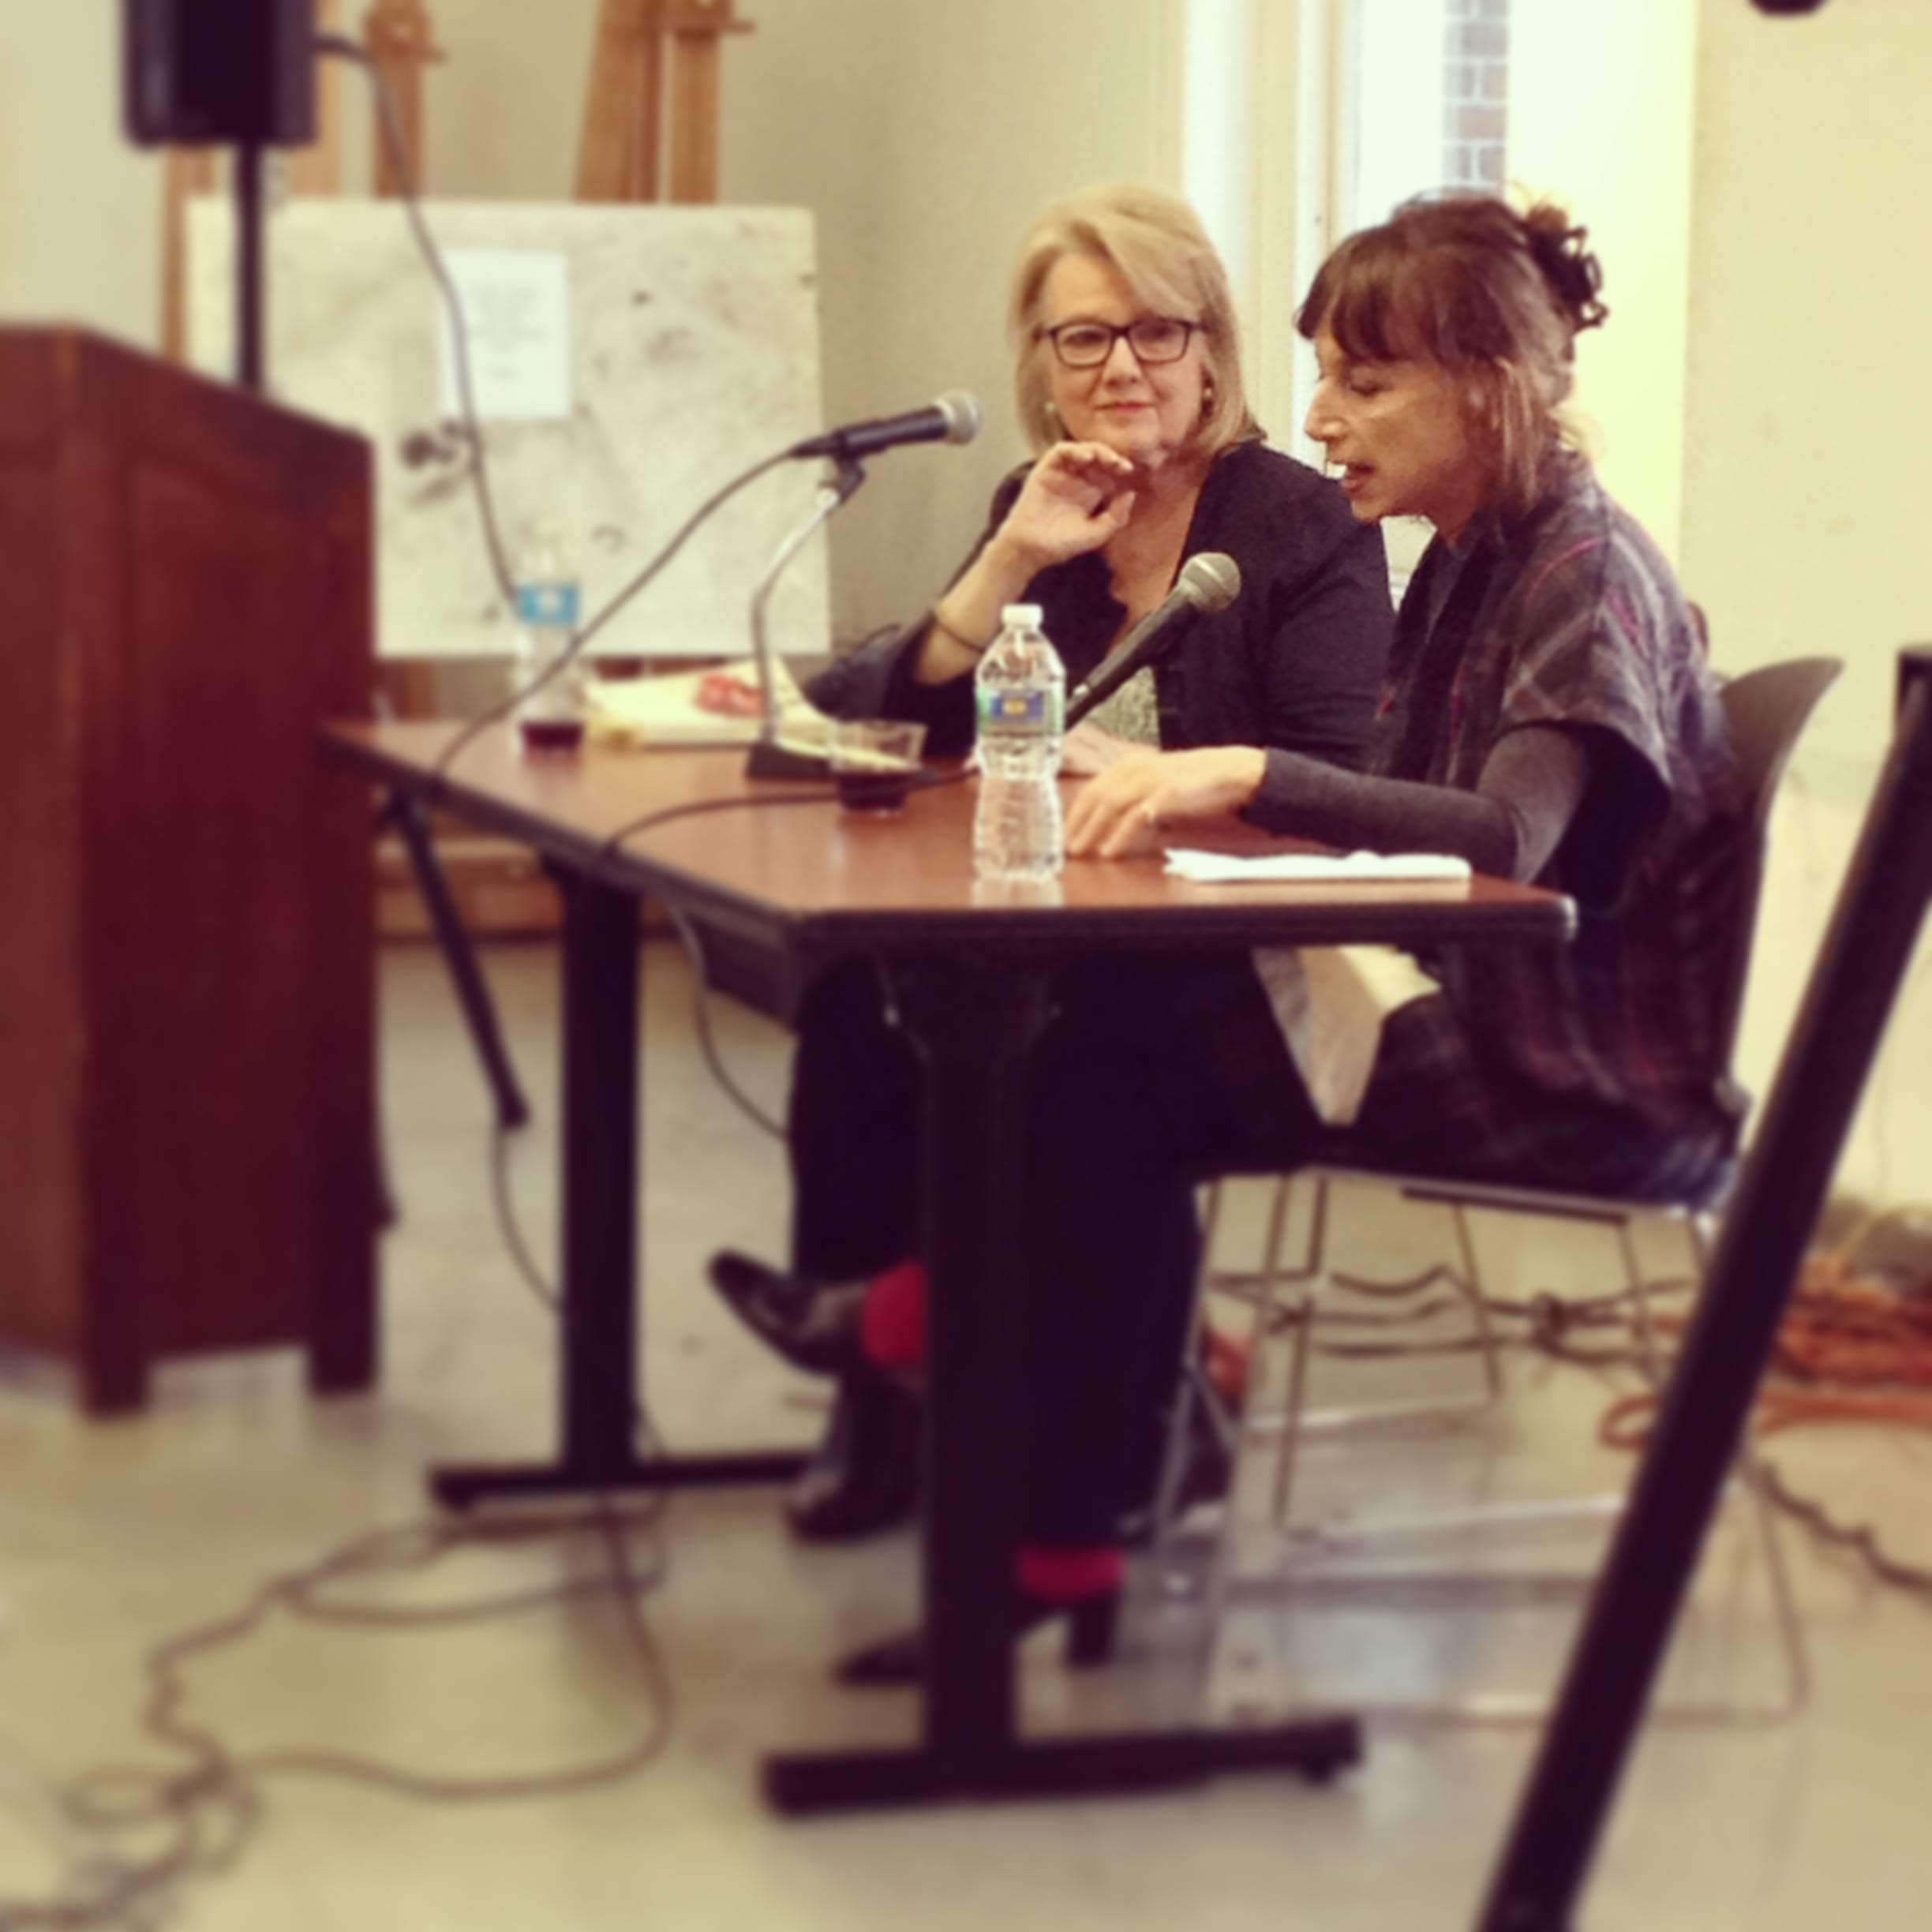 Judith Thurman in conversation with Lis Harris at Columbia’s Graduate Writing Program’s Nonfiction Dialogue on Wednesday, April 16, 2014.